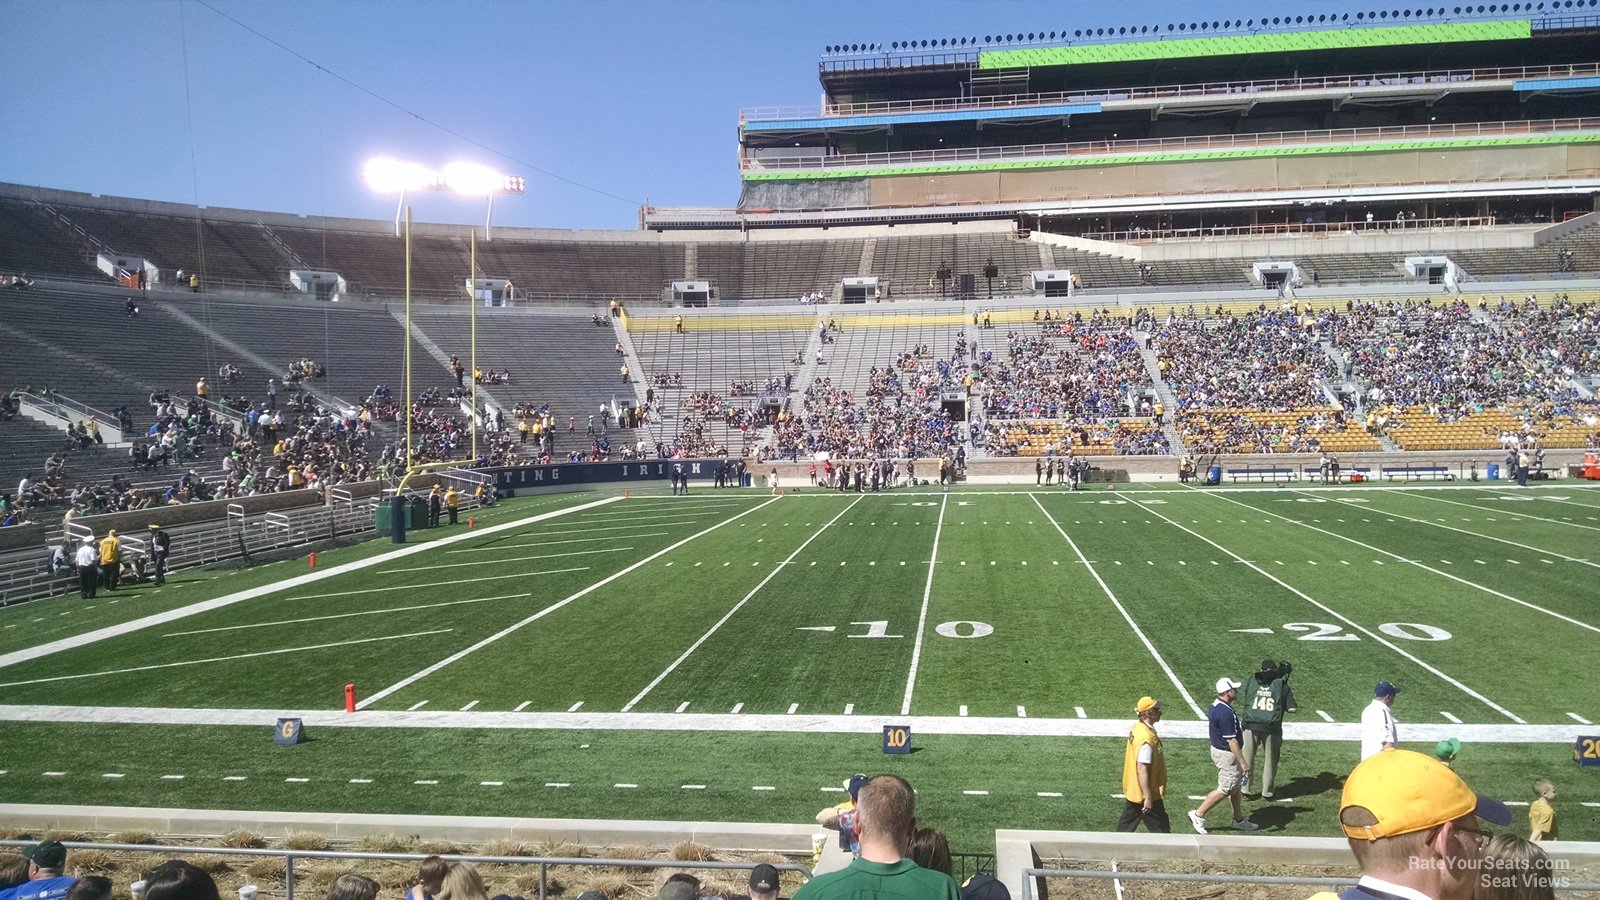 Notre Dame Football Seating Chart With Rows